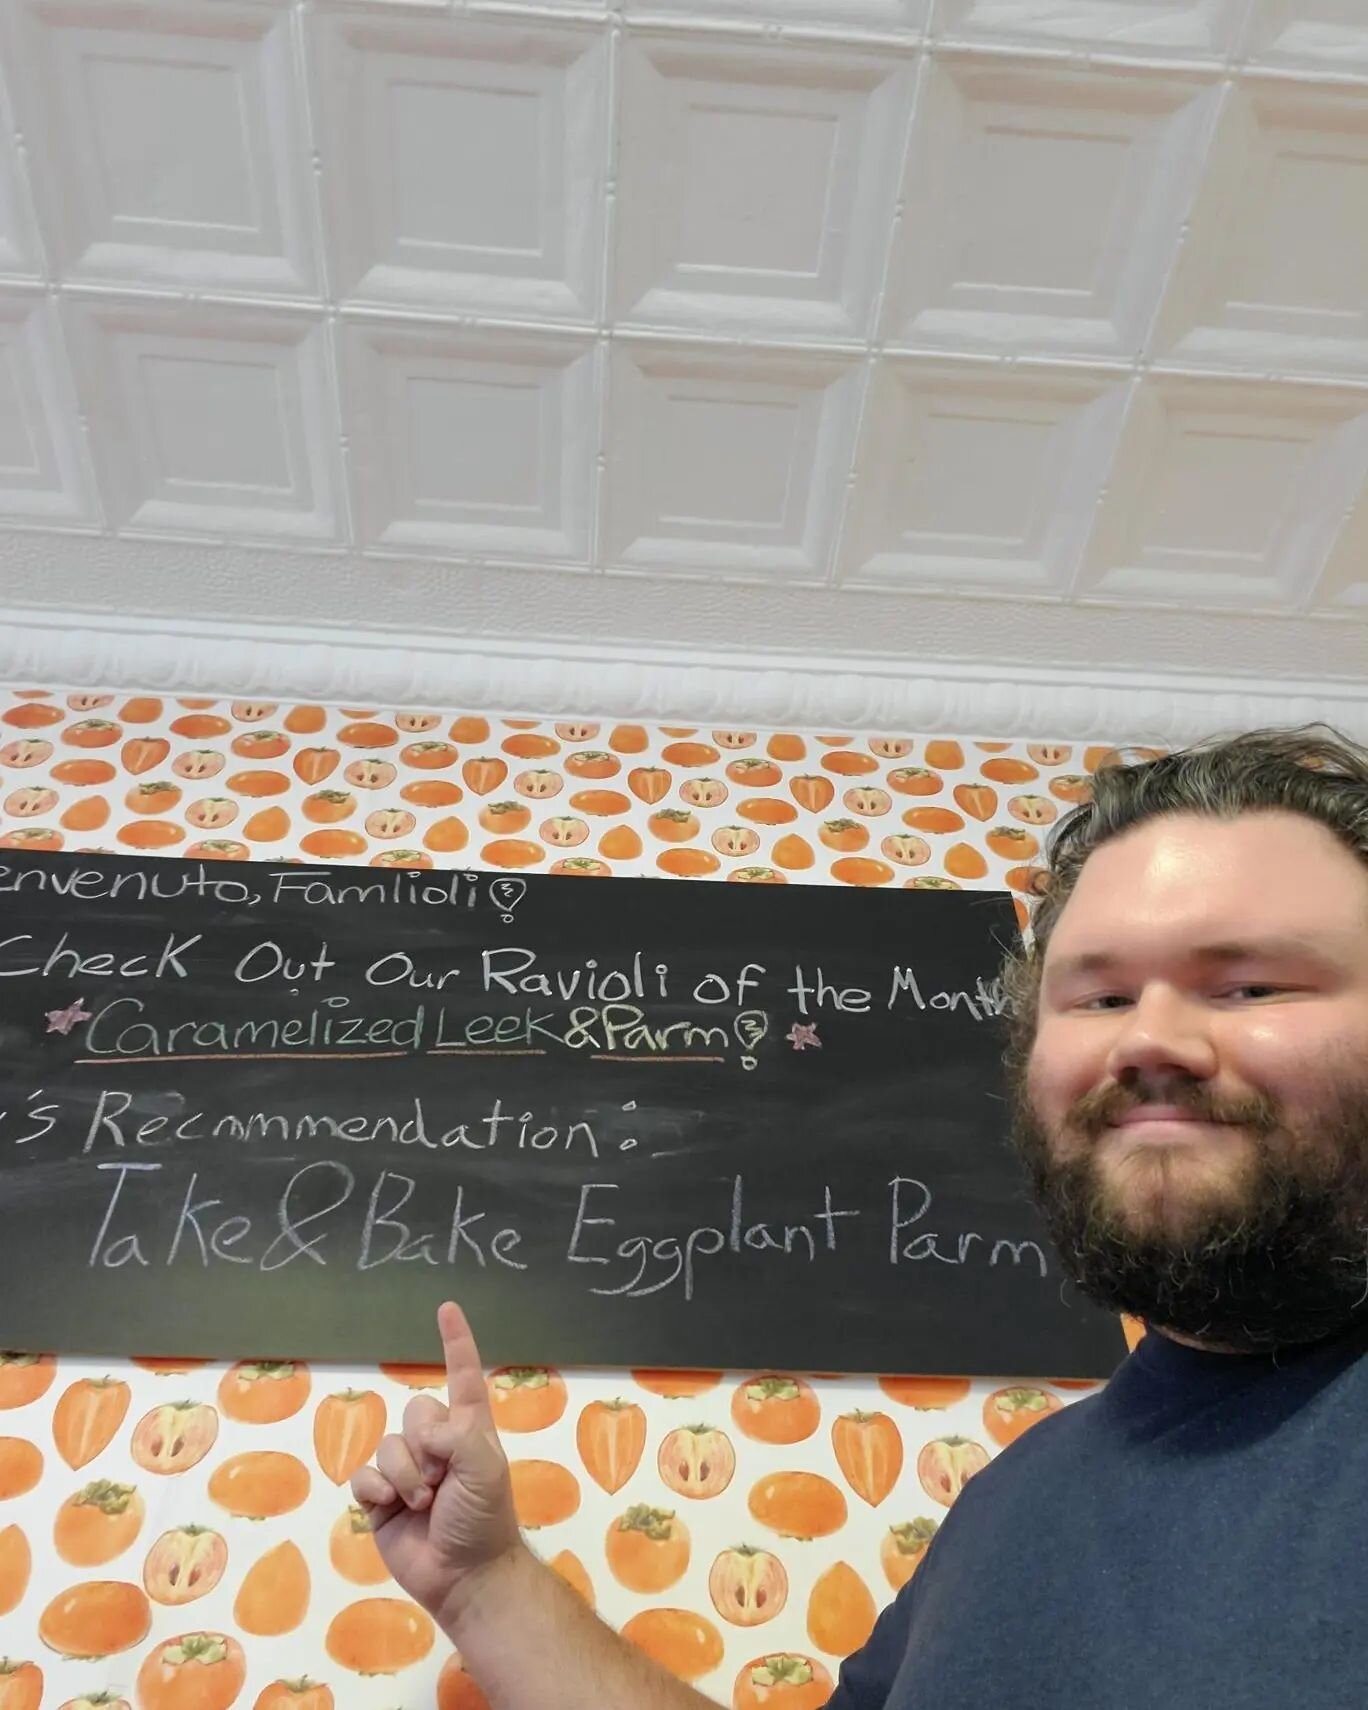 What's up Famlioli?? The shop just opened minutes ago, but James is ready for you to drop on in. Oh! He's got a recommendation from our take&amp;bake selection: a delicious, vegetarian eggplant parm to help you ease into the work week. See you at 230